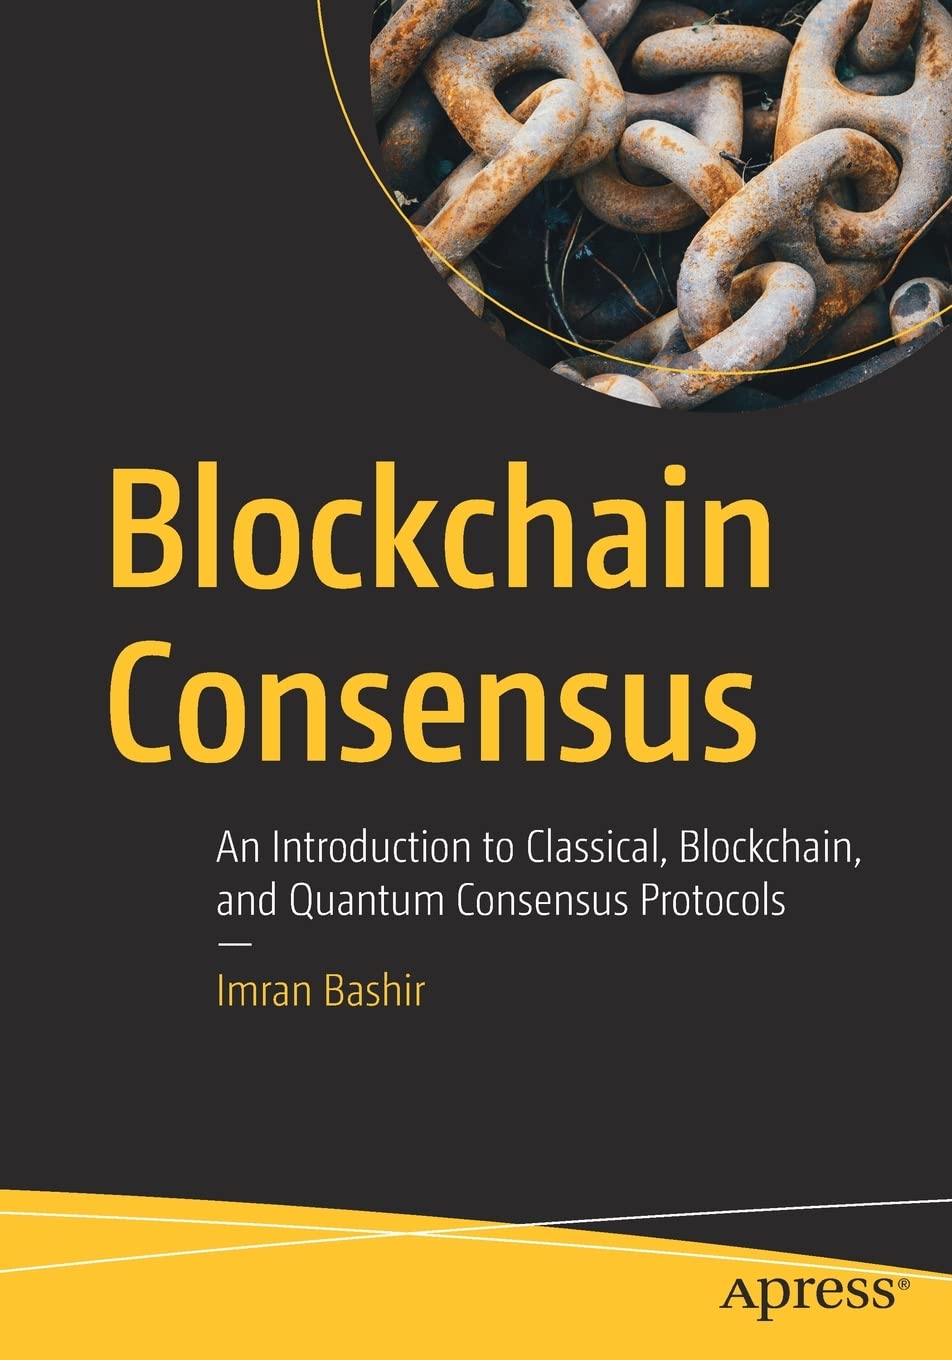 Blockchain Consensus: An Introduction to Classical, Blockchain, and Quantum Consensus Protocols by Imran Bashir 